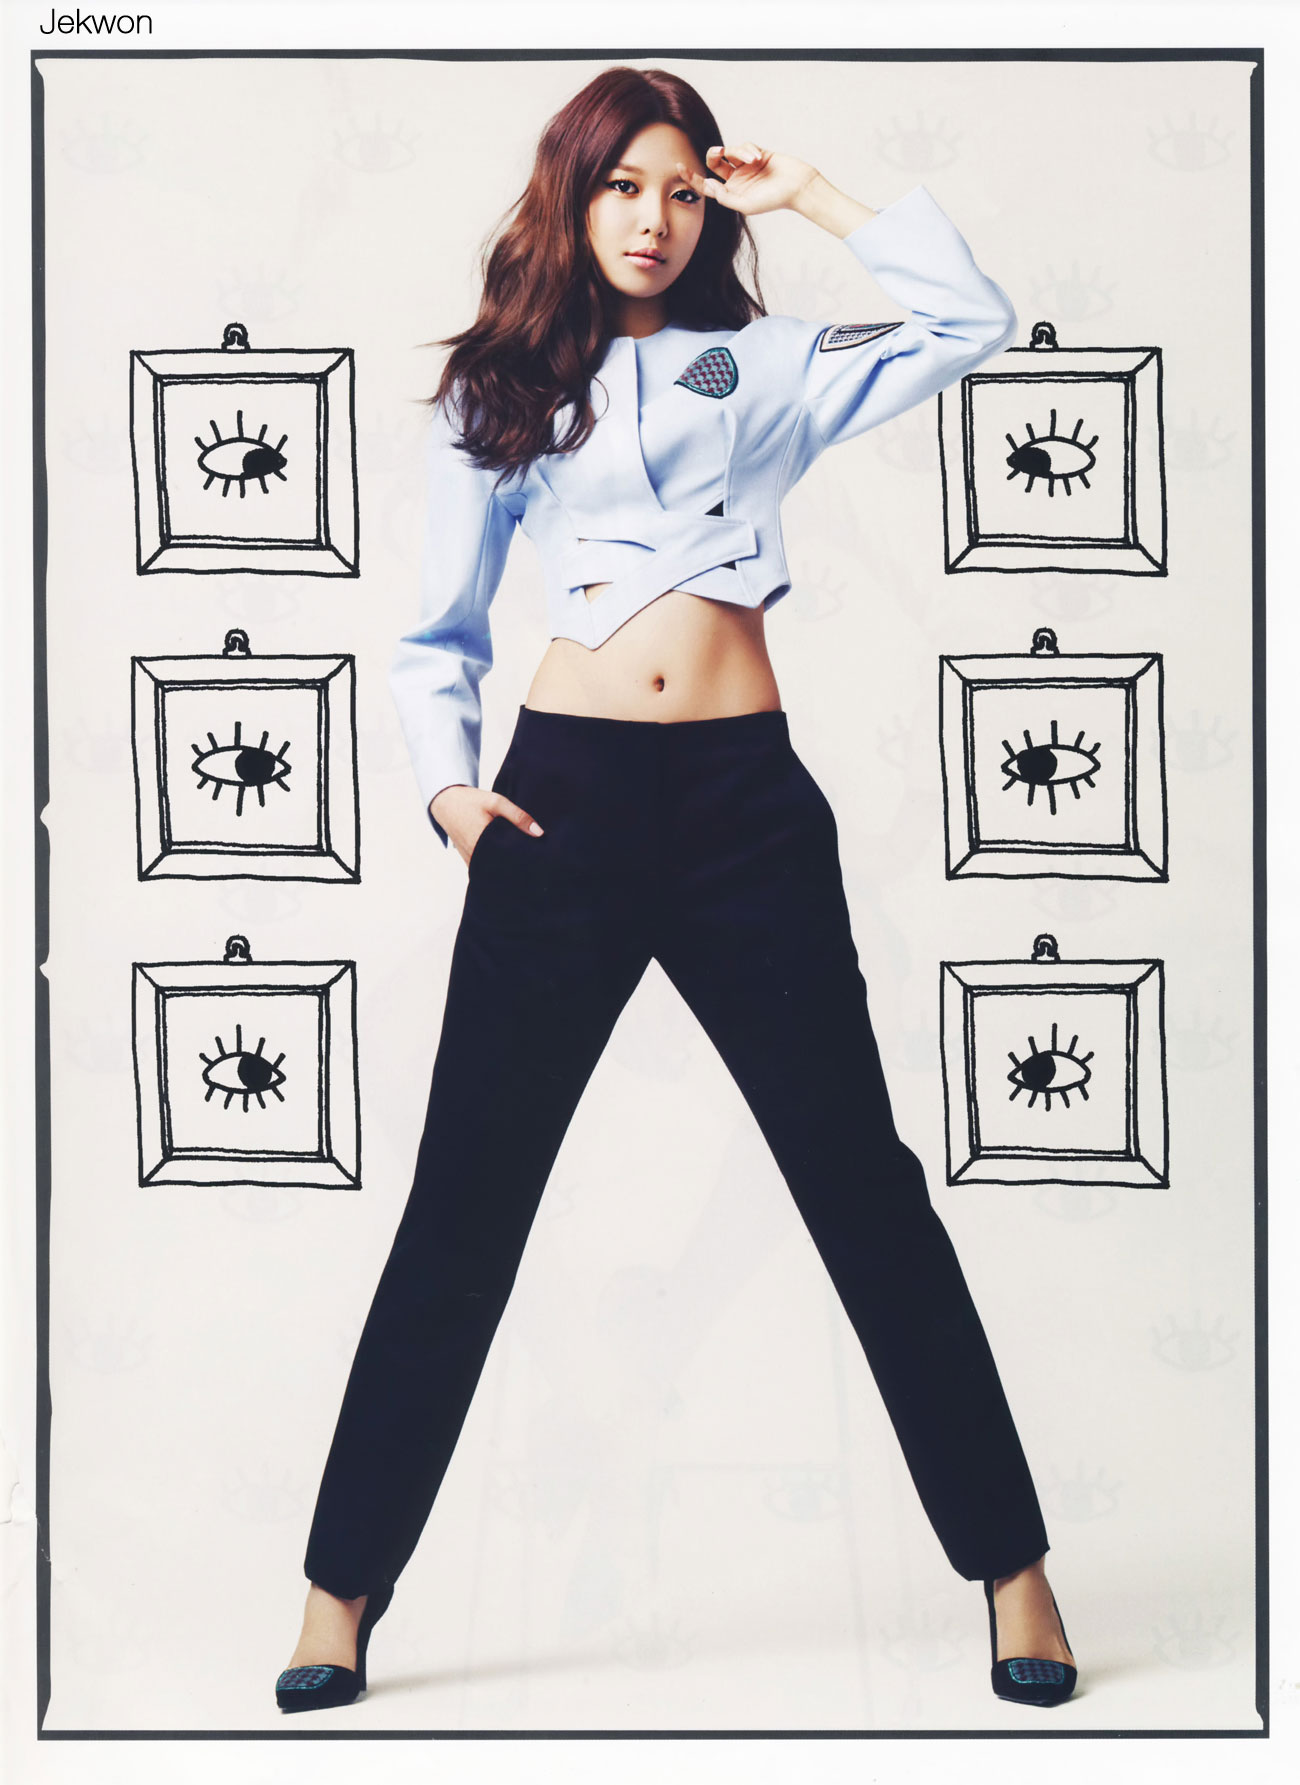 SNSD Sooyoung Instyle Magazine 2014